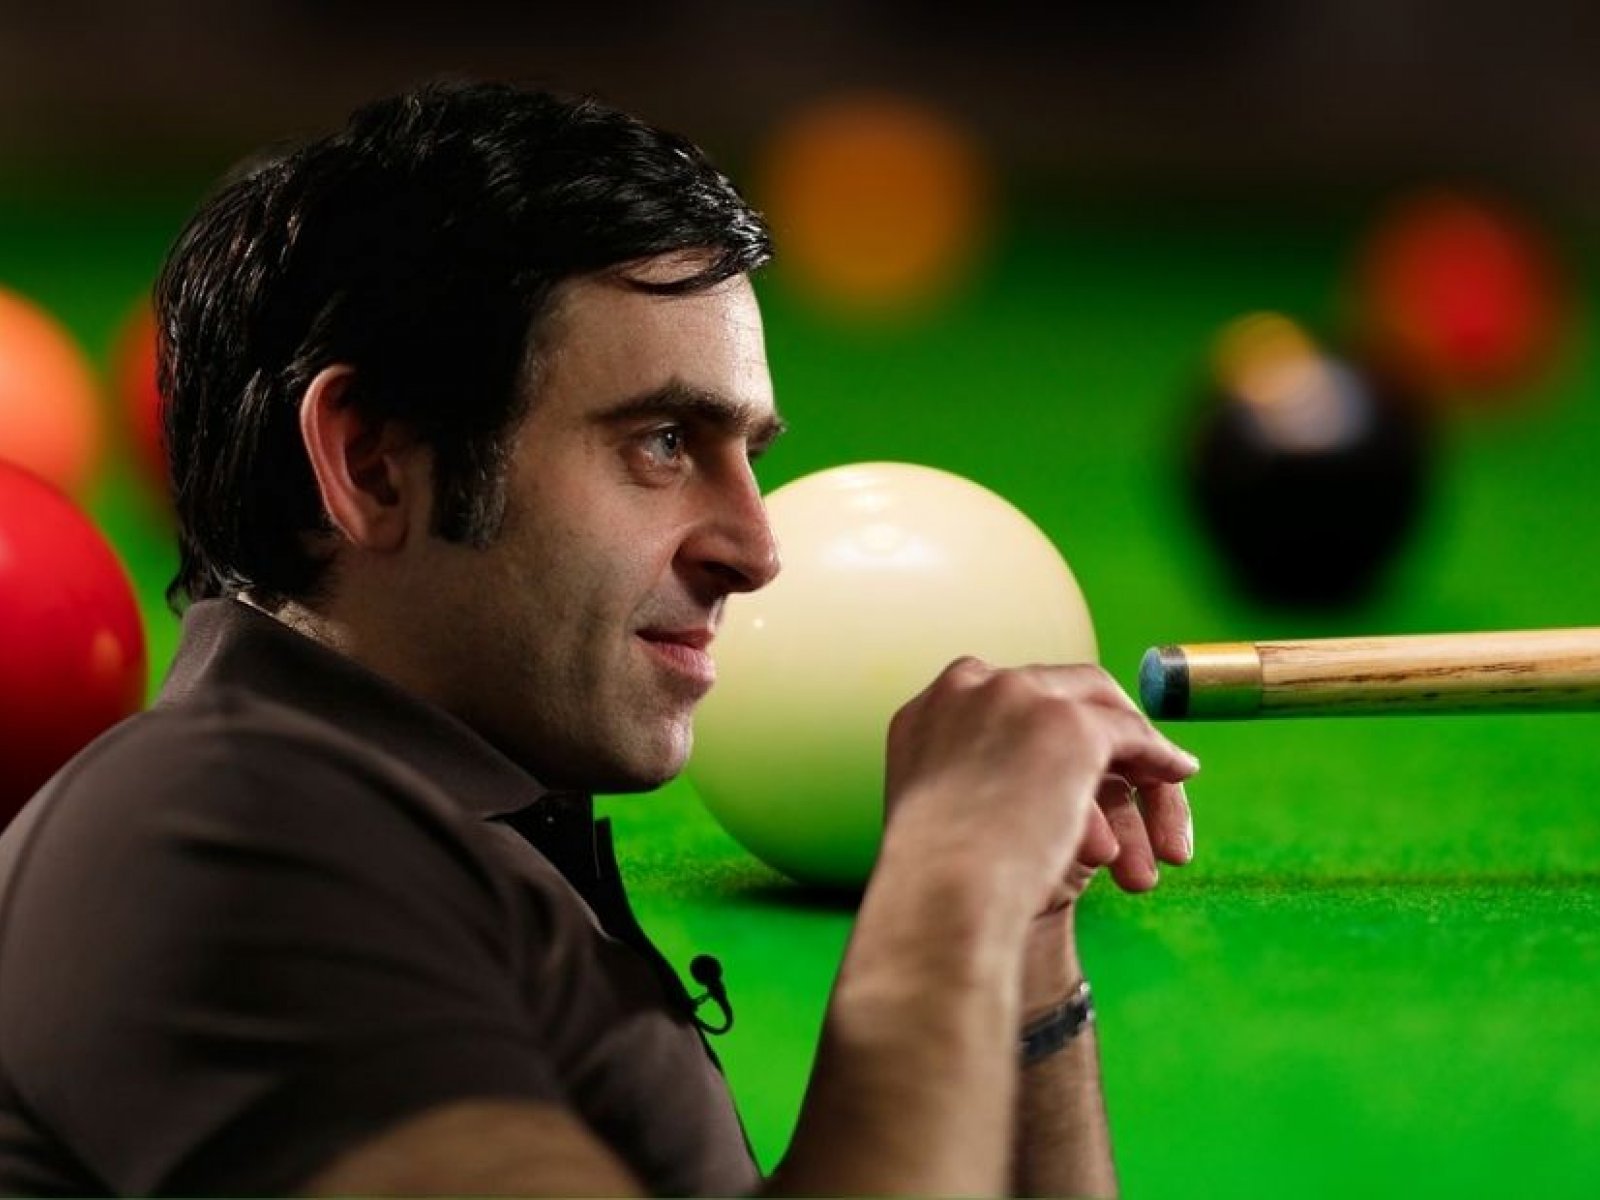 Ronnie OSullivan Now 4/1 Favourite from 16/1 for Sports Personality of the Year 2022 with Betting Sites